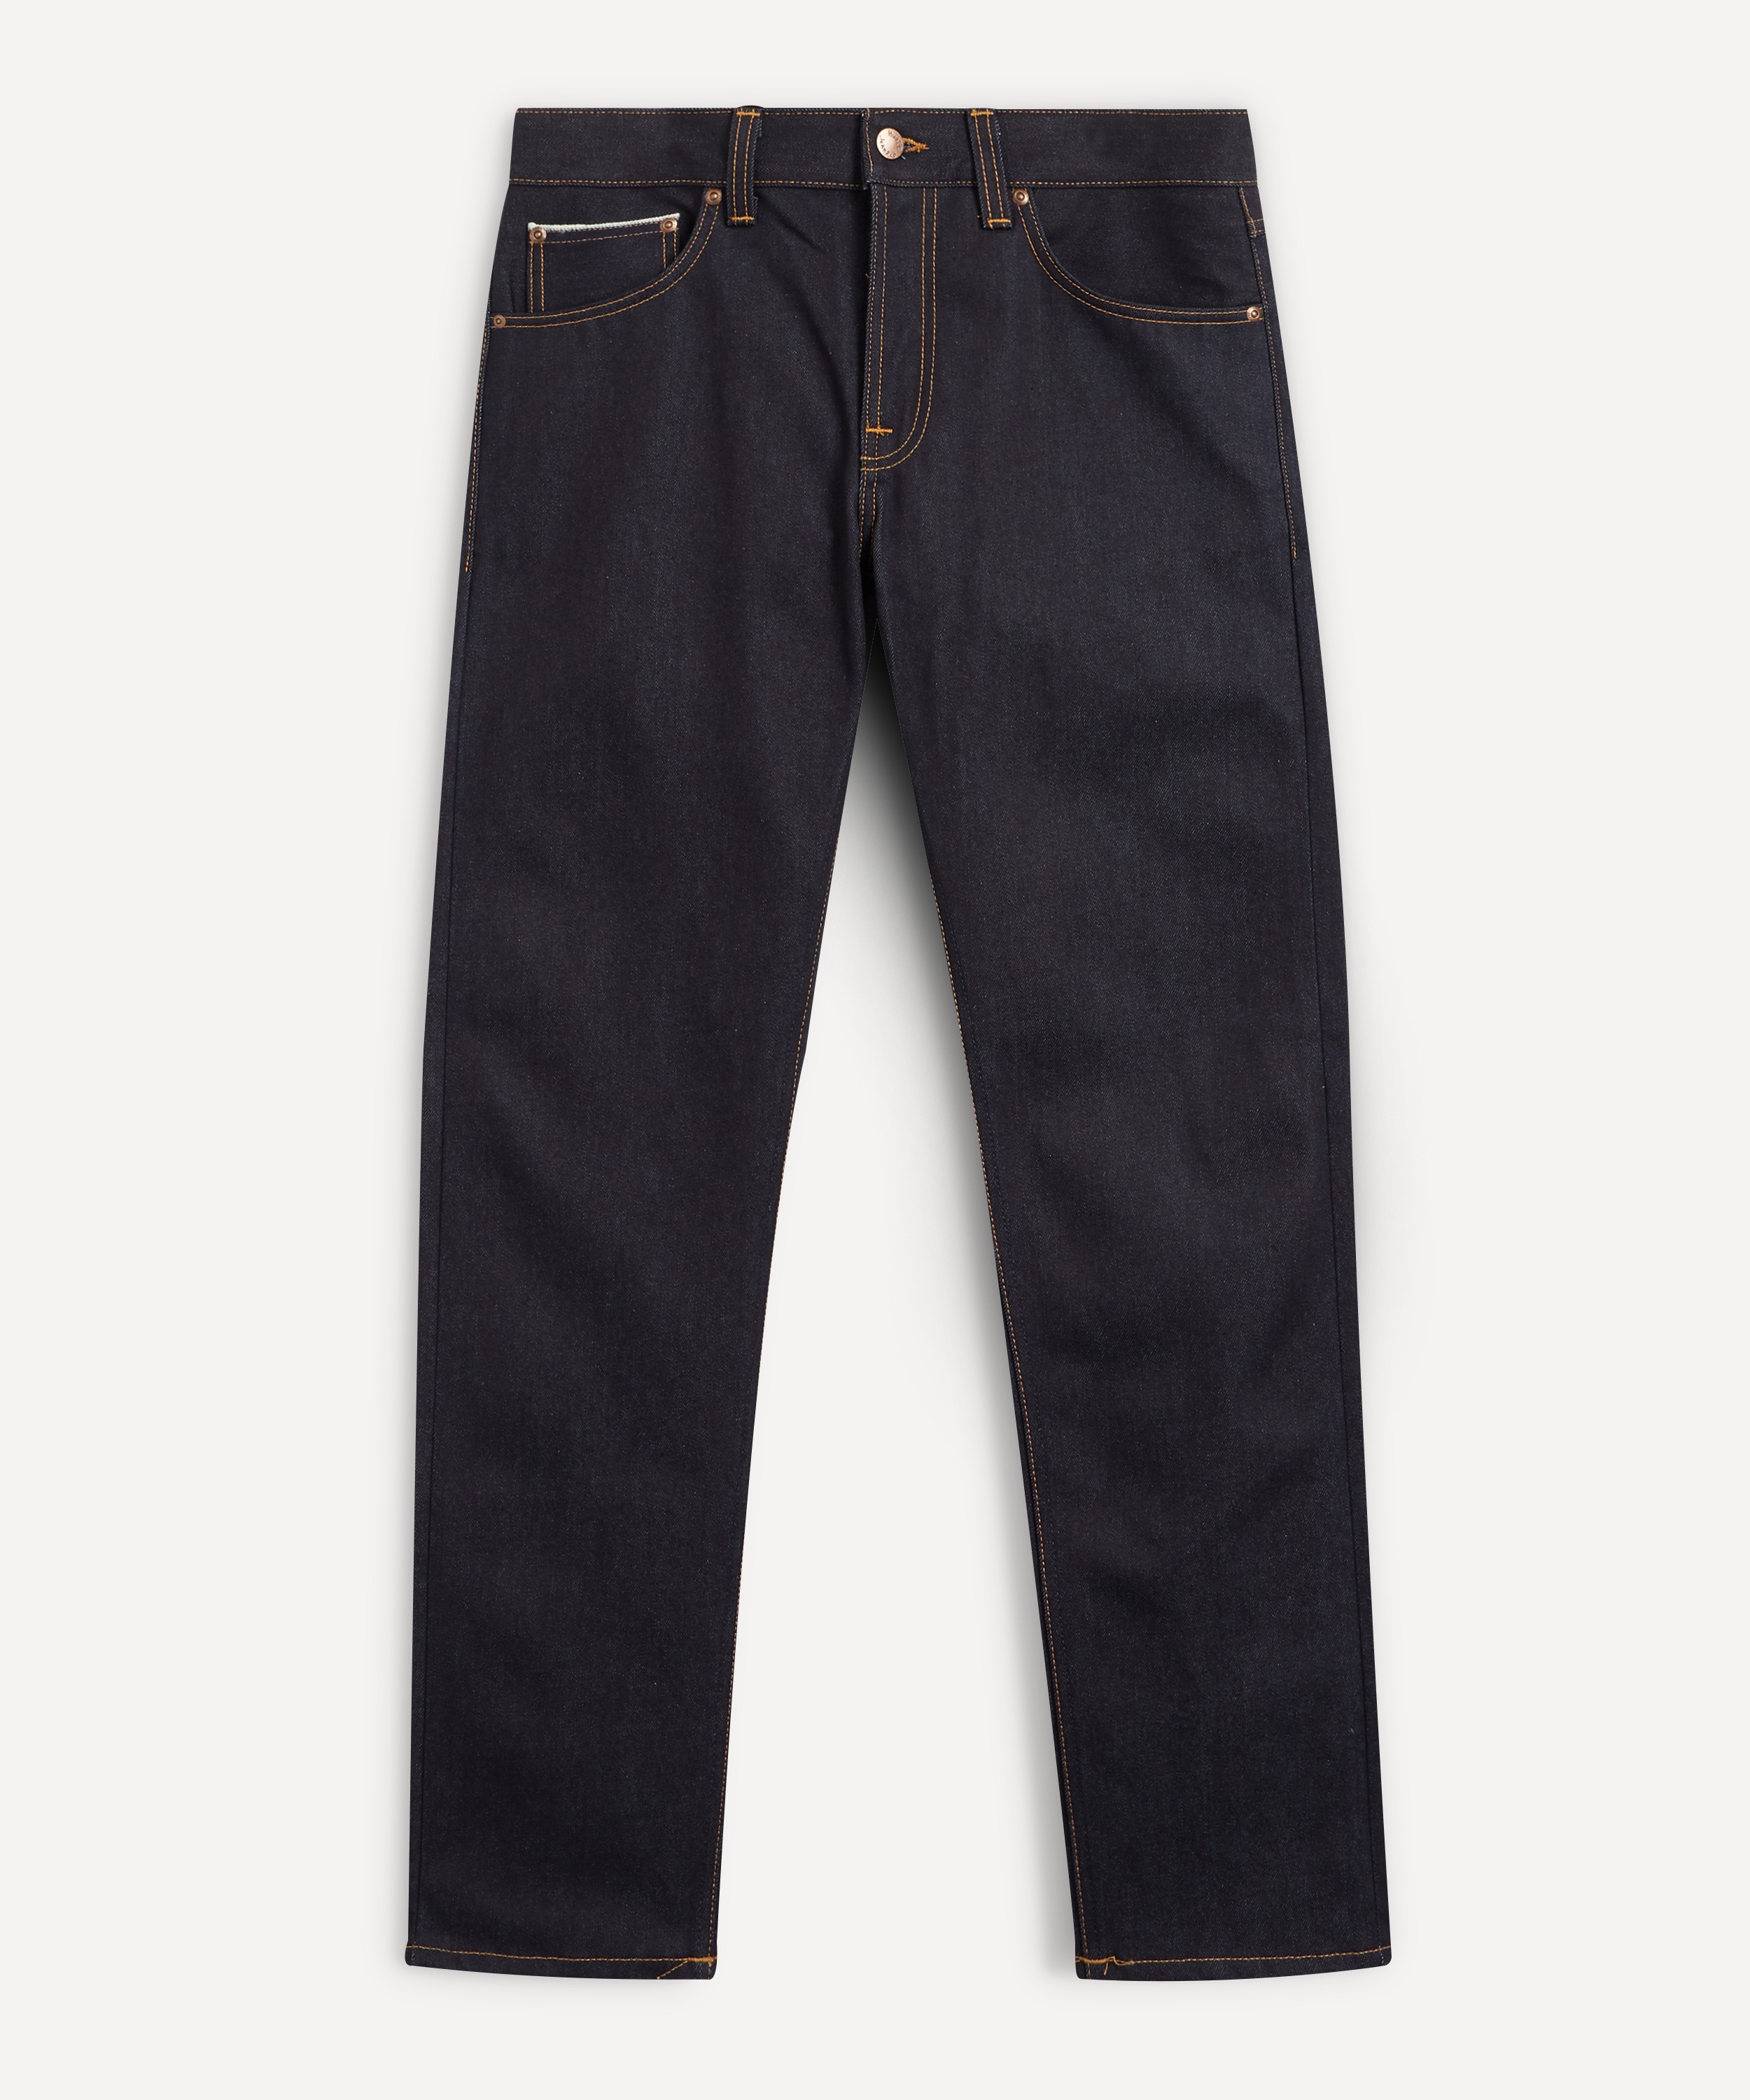 Nudie Jeans Gritty Jackson Dry Maze Selvage Jeans | Liberty